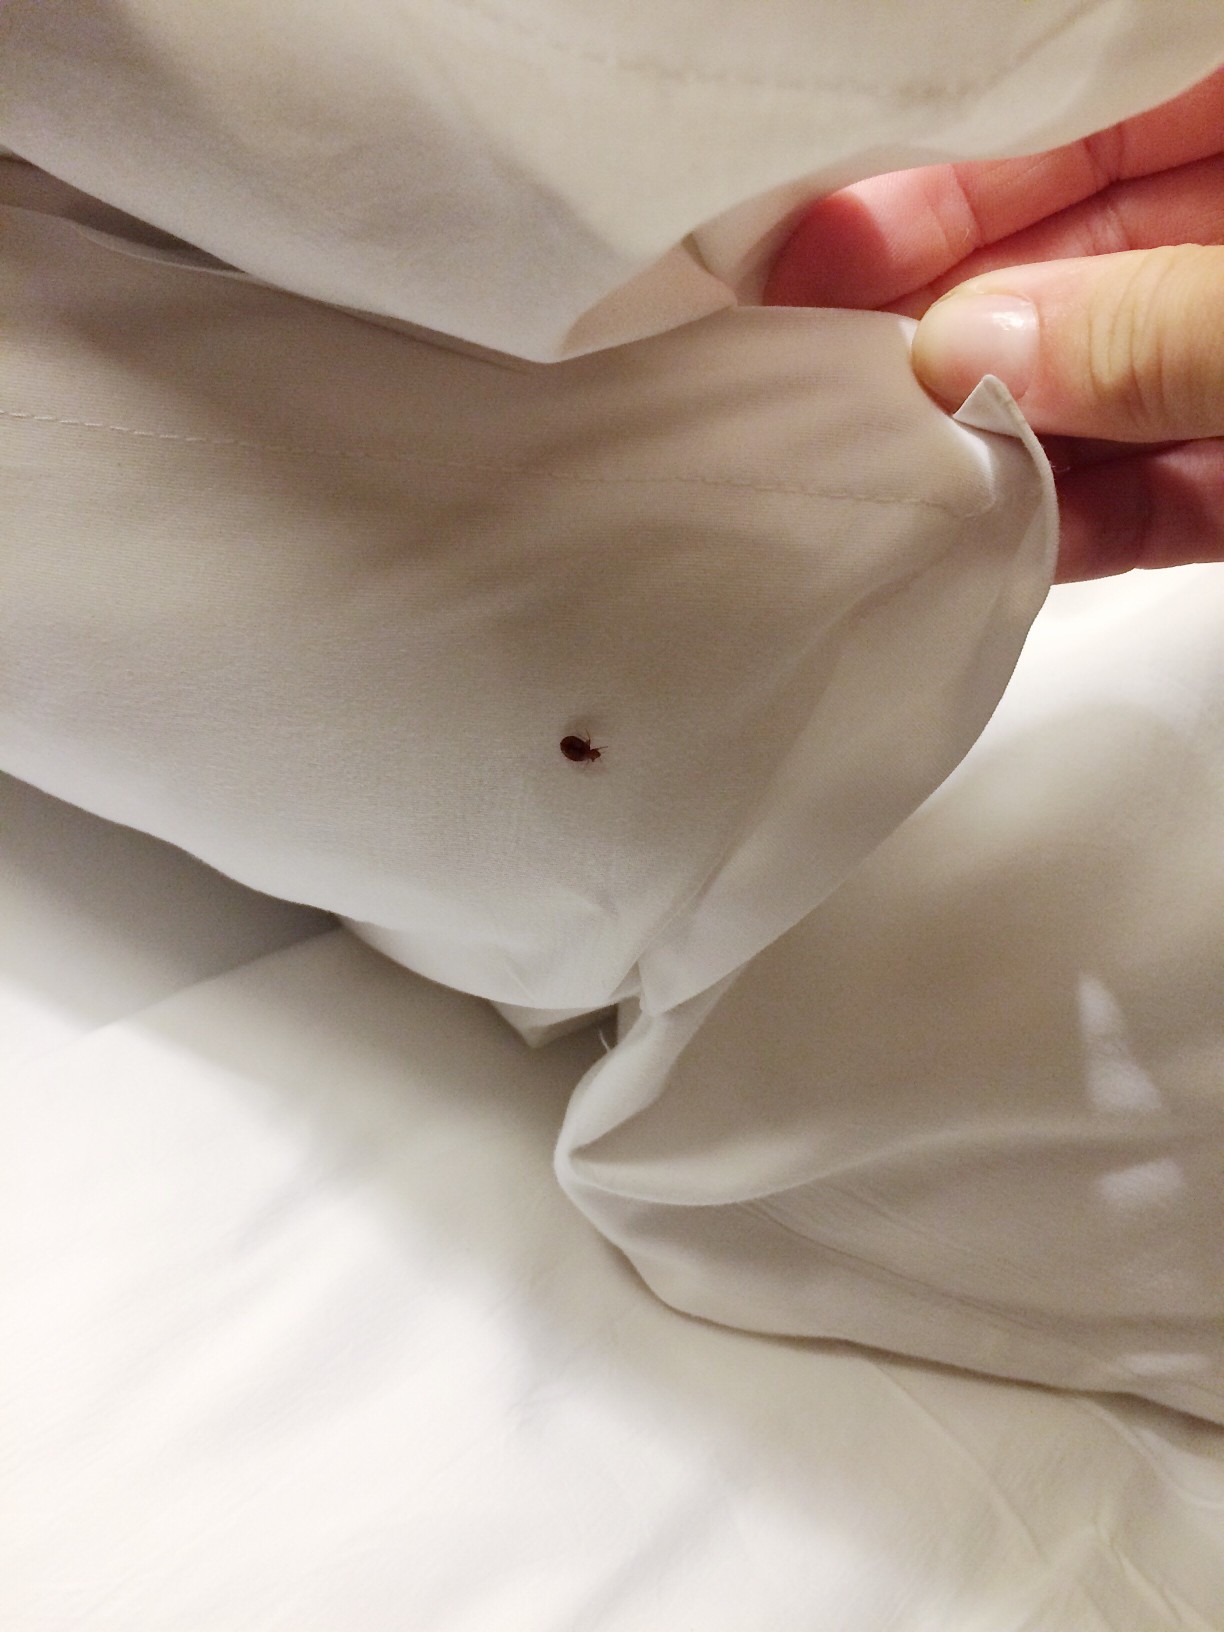 finding a bed bug under a blanket